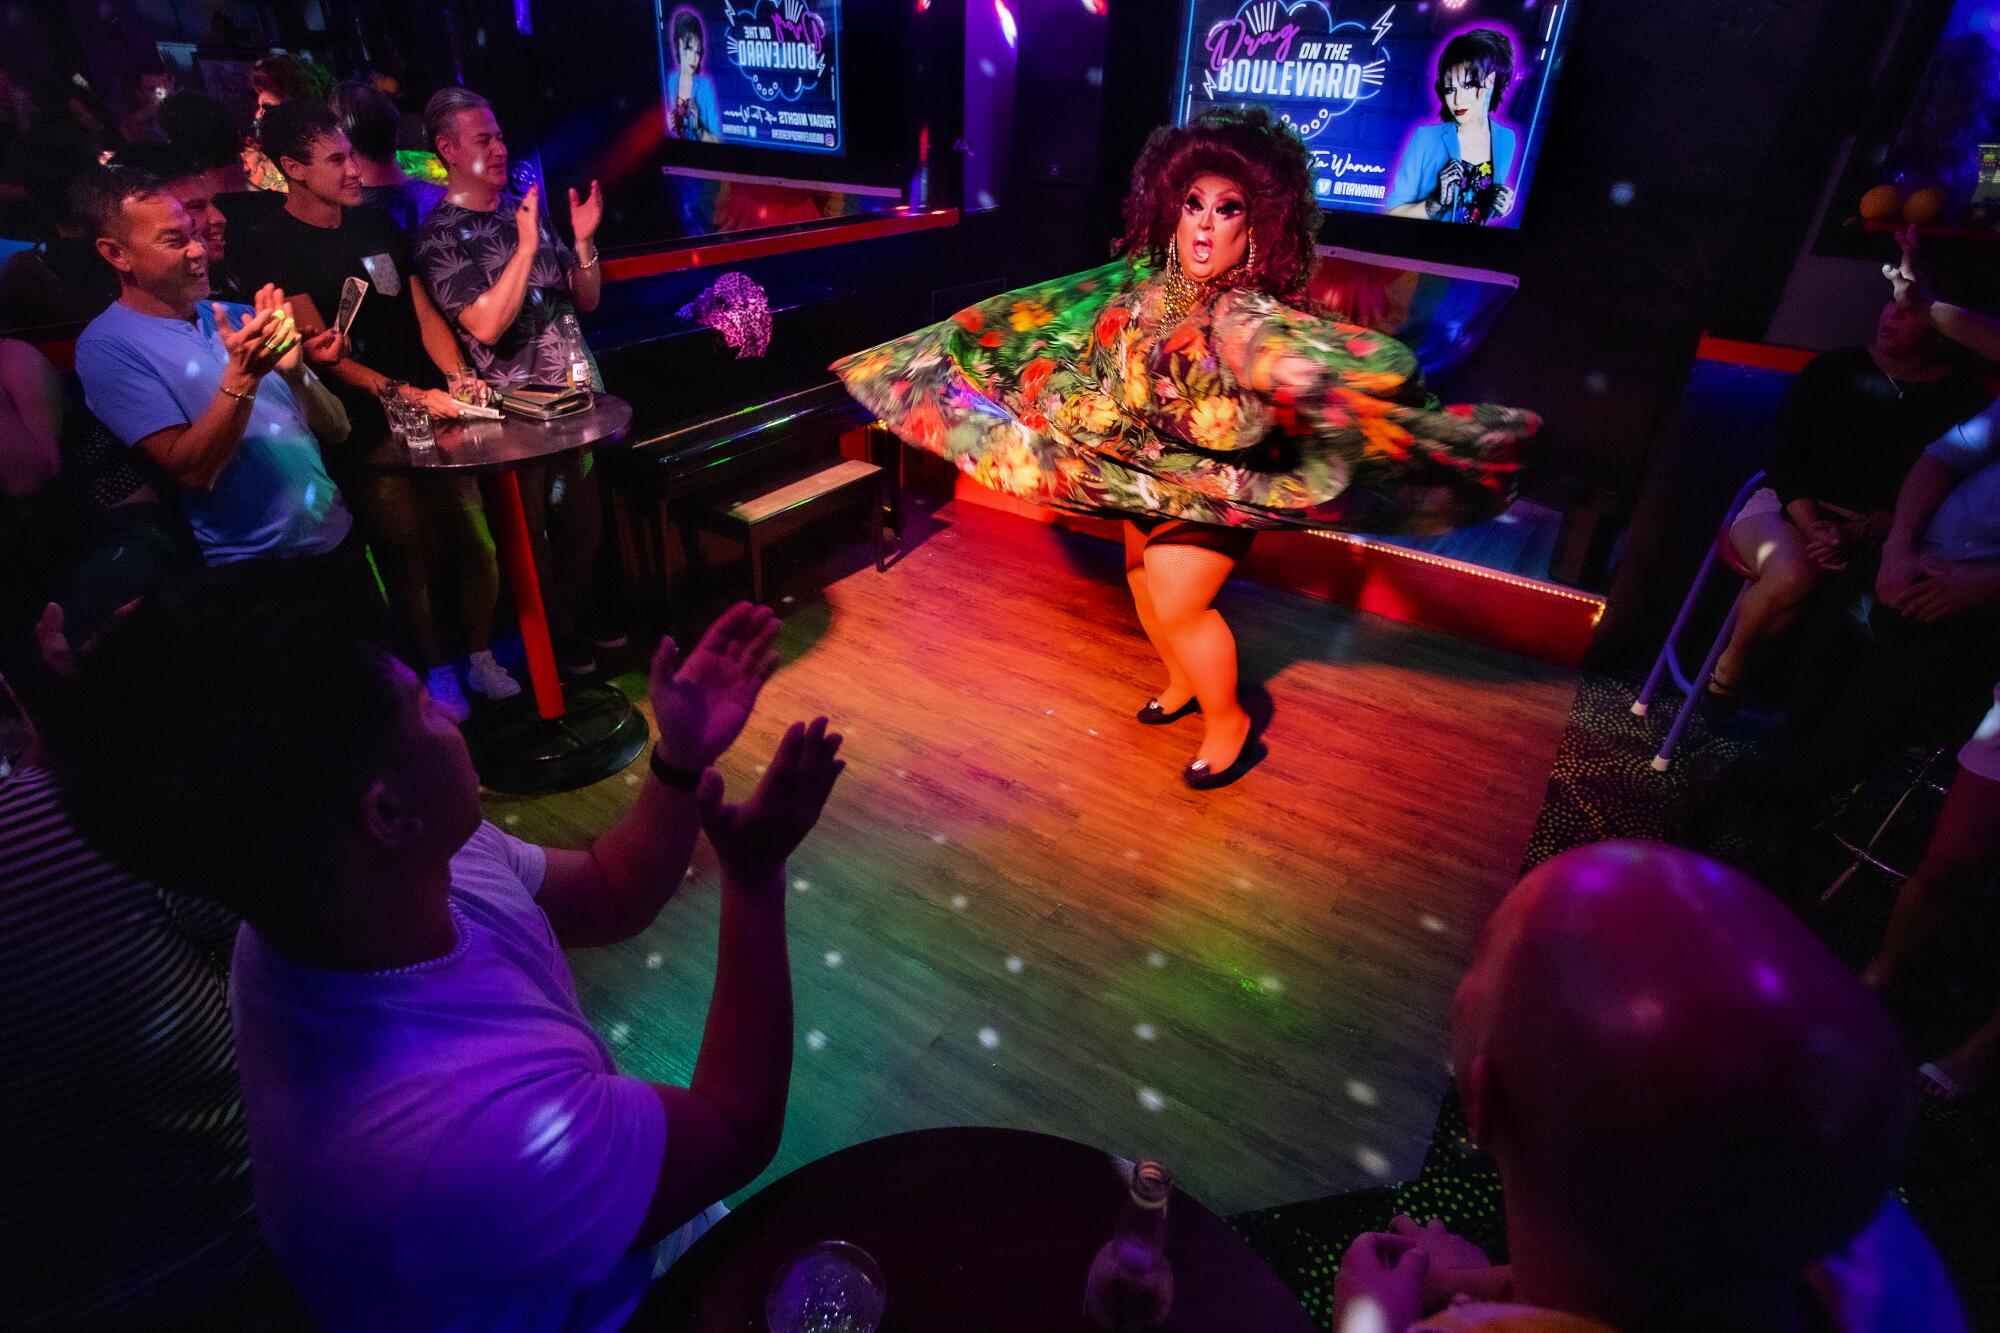 A drag queen performs on a small stage, surrounded by a clapping audience.